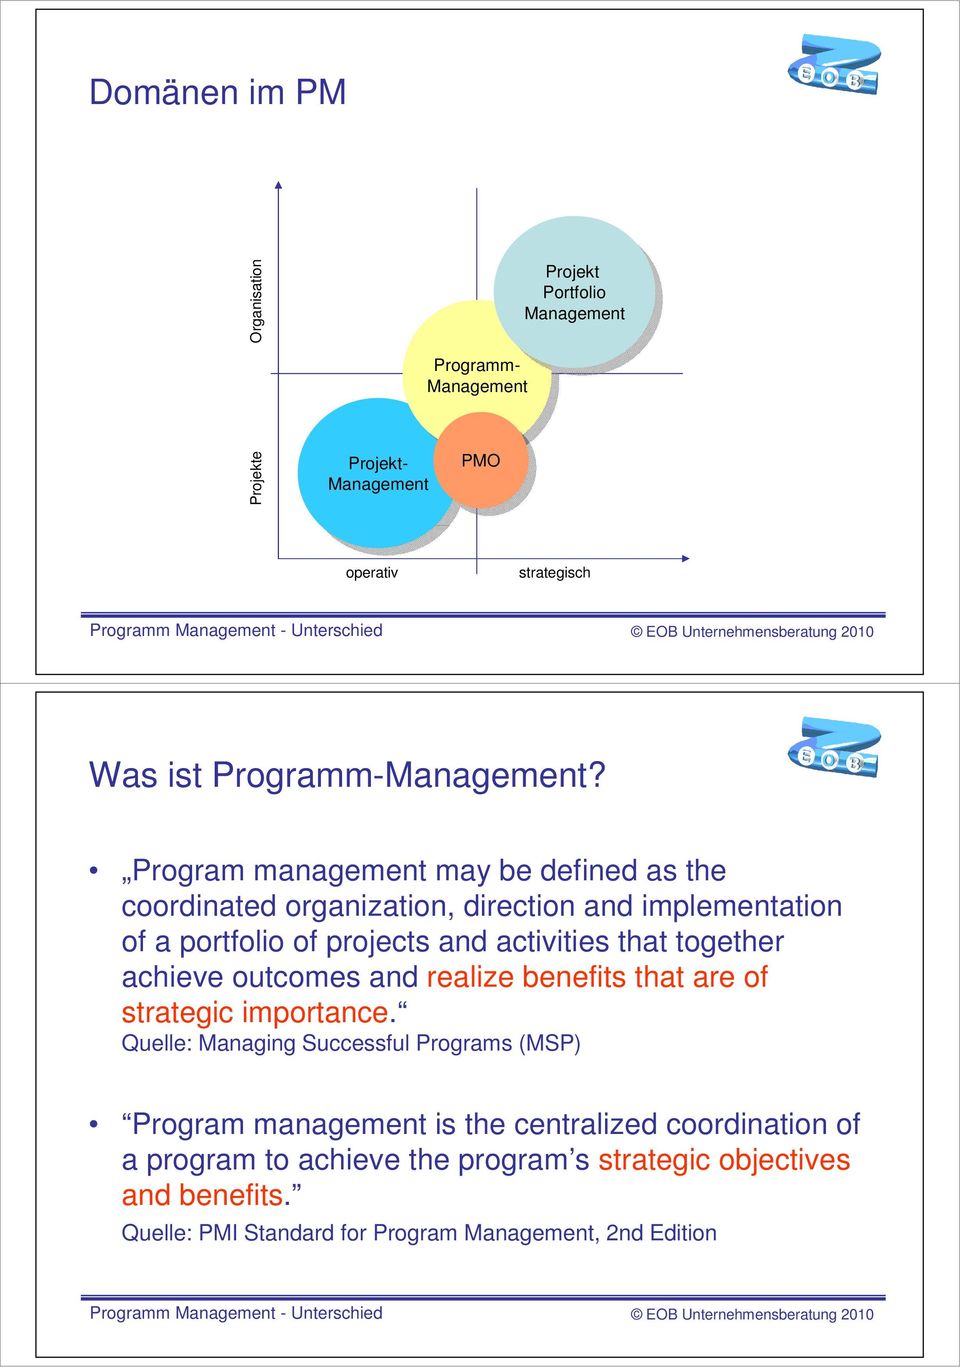 Program management may be defined as the coordinated organization, direction and implementation of a portfolio of projects and activities that